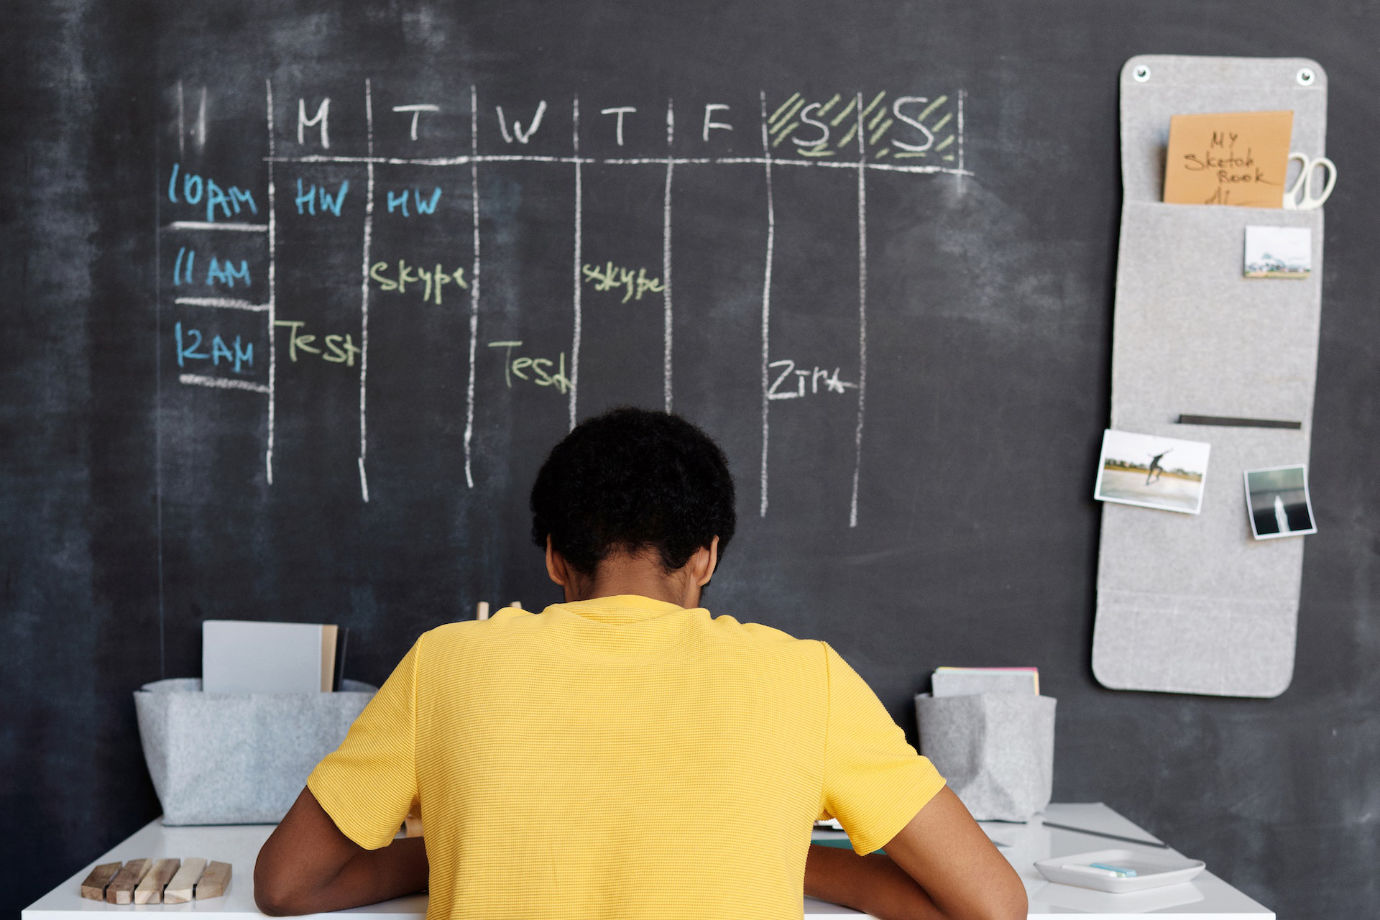 A young man sitting on his desk focused on studying while facing a weekly plan written on a black board on the wall.